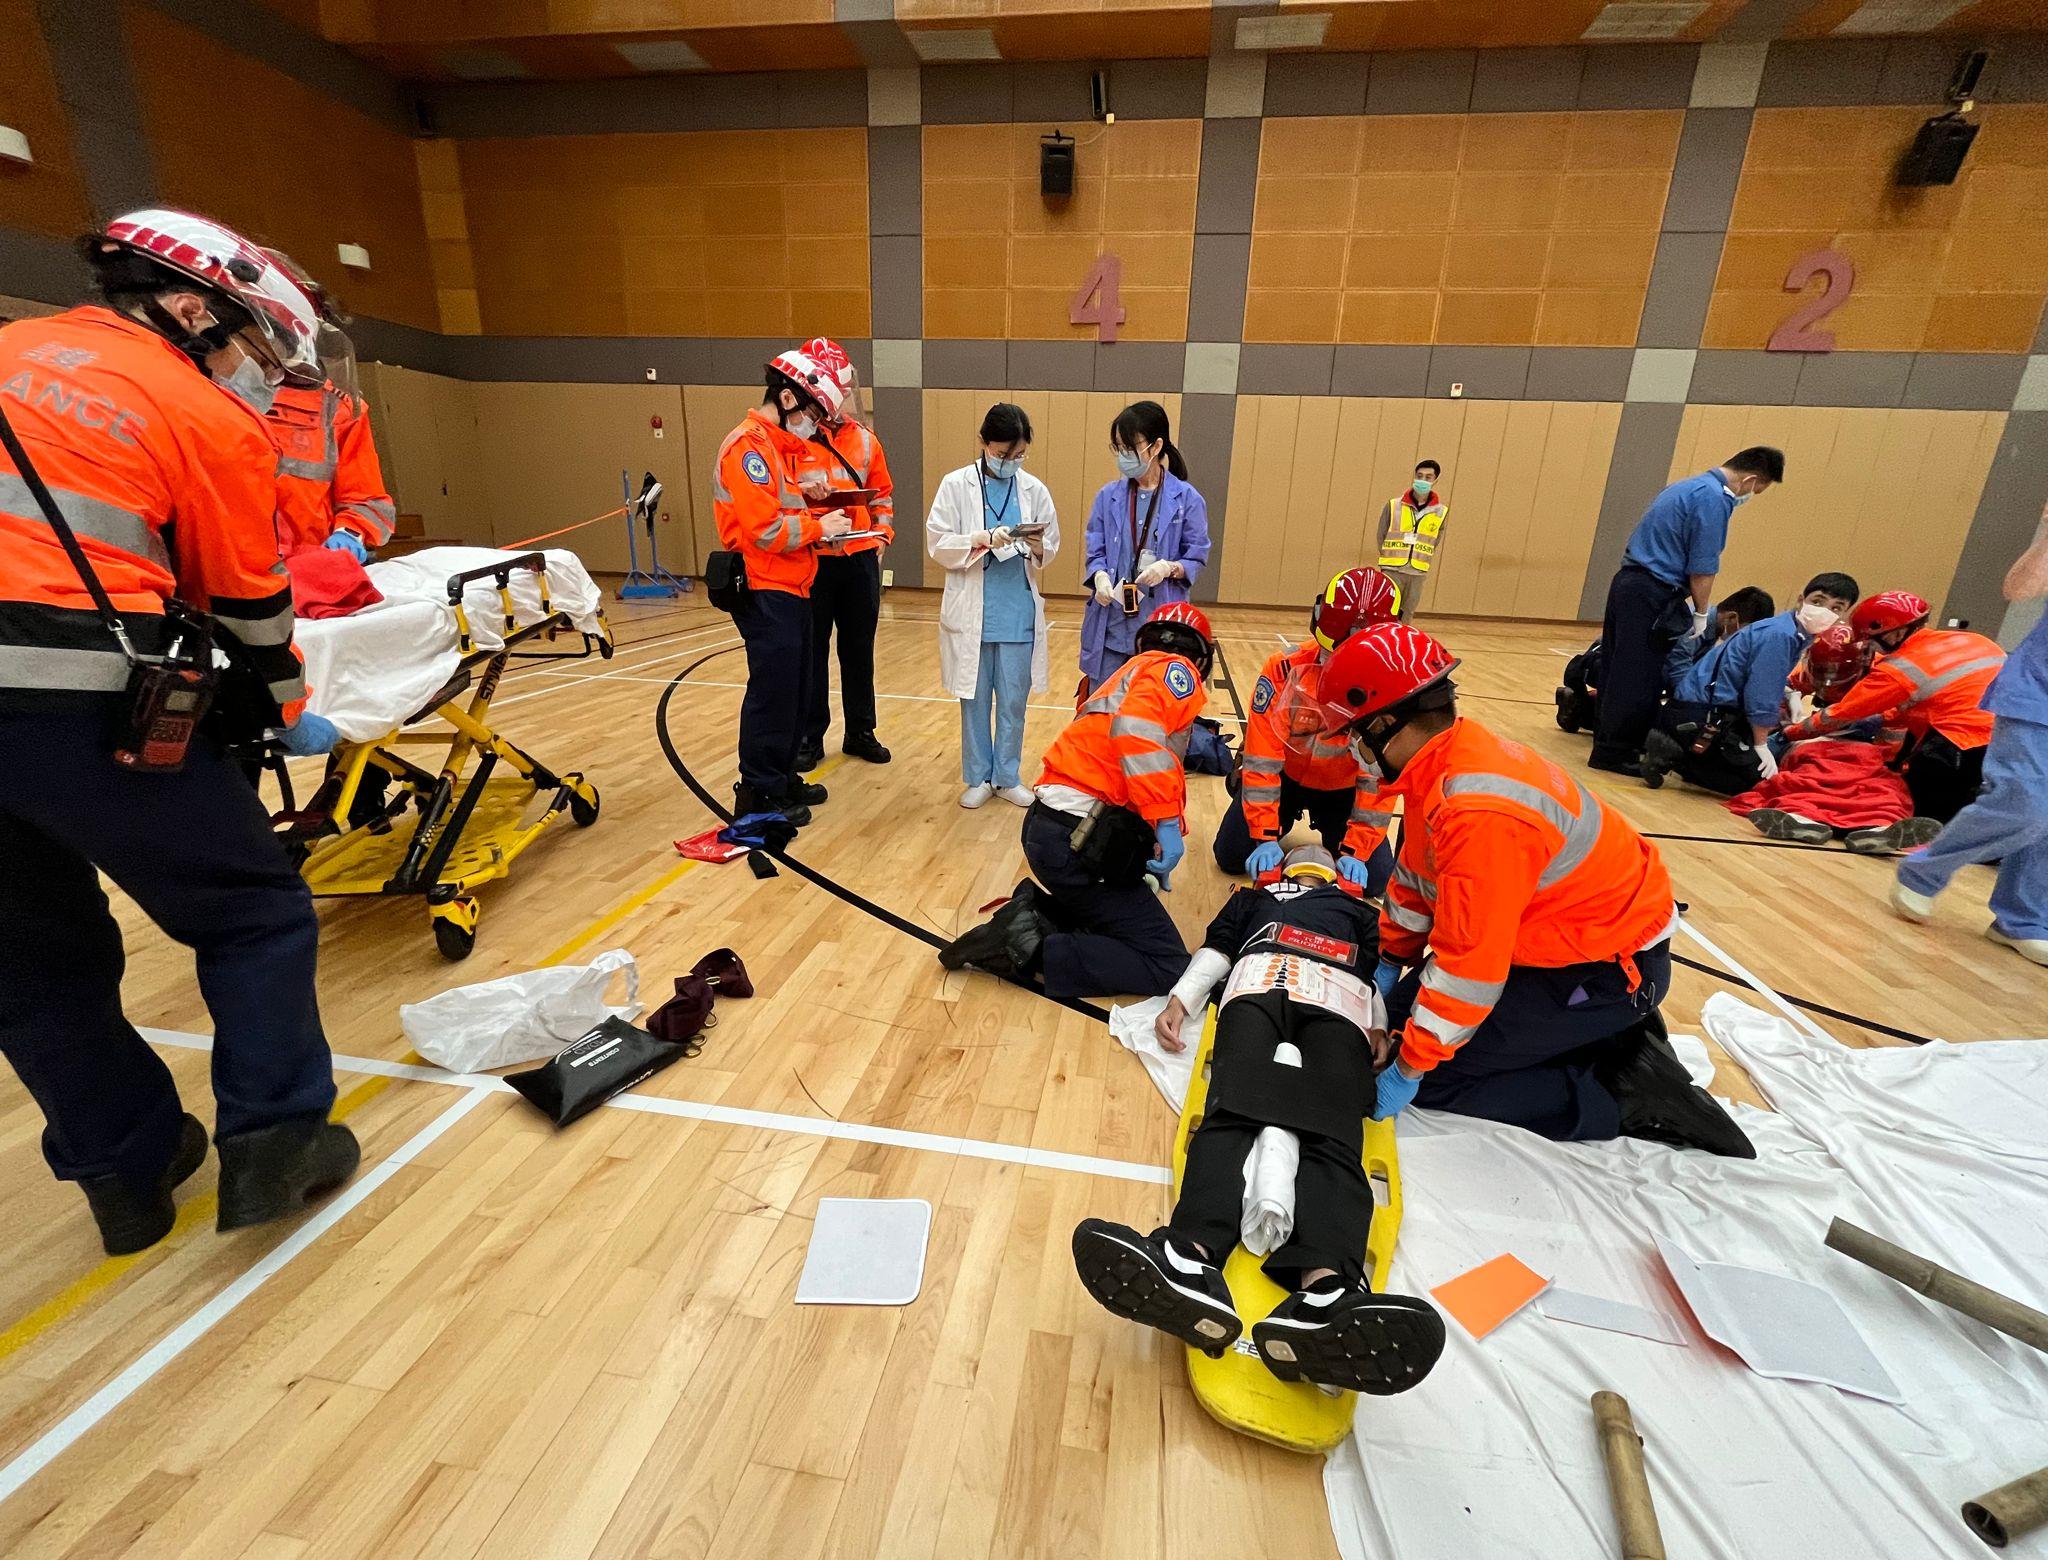 St John Hospital organises an interdepartmental disaster drill in the afternoon today (April 21) with the Hospital Authority Head Office Major Incident Control Centre, the Fire Services Department, the Hong Kong Police Force, the Government Flying Service, the Auxiliary Medical Service and the Home Affairs Department to enhance the co-ordination and communication during major incidents.